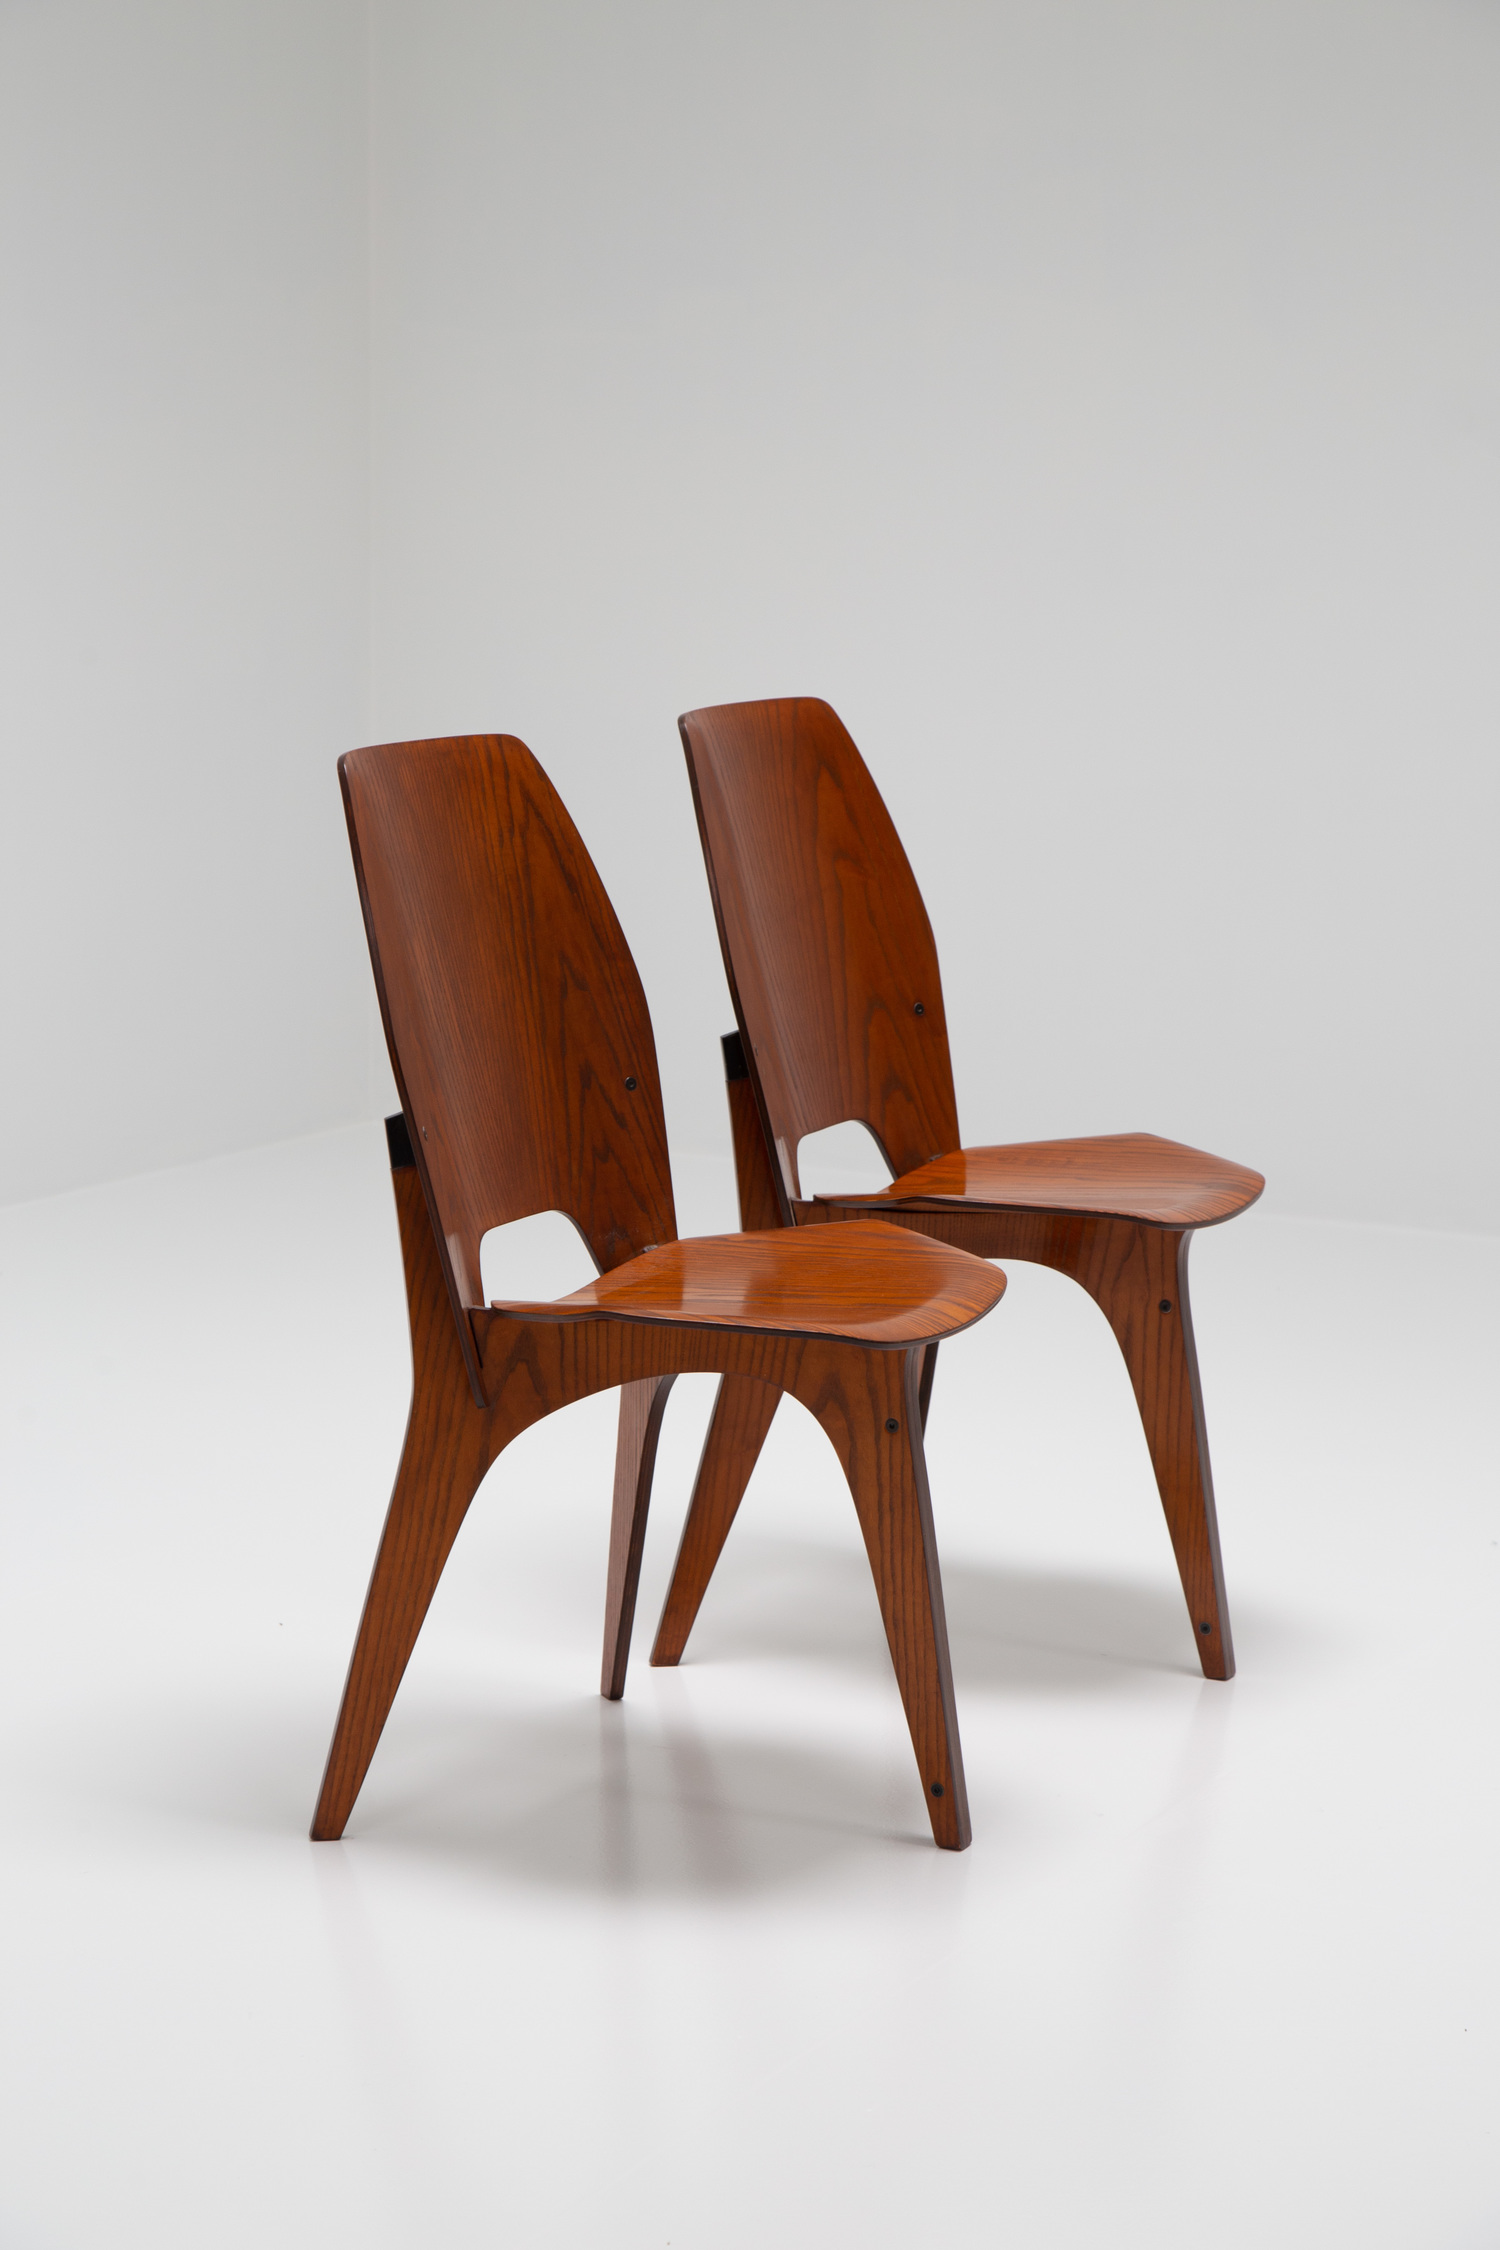 Pair of chairs by Eugenio Gerli for Tecno